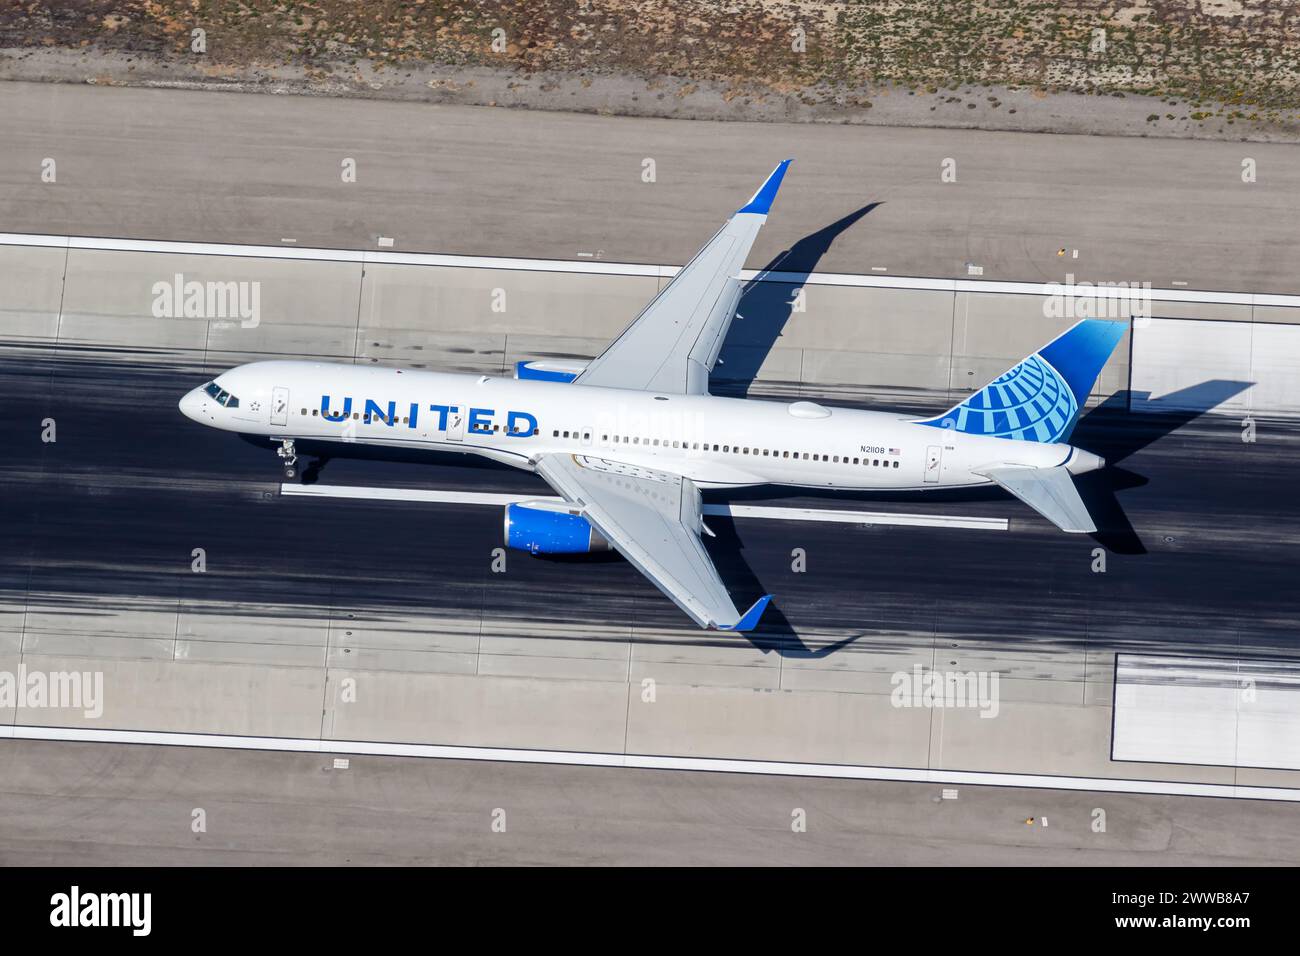 Los Angeles, United States - November 4, 2022: United Airlines Boeing 757-200 airplane at Los Angeles Airport (LAX) aerial view in the United States. Stock Photo